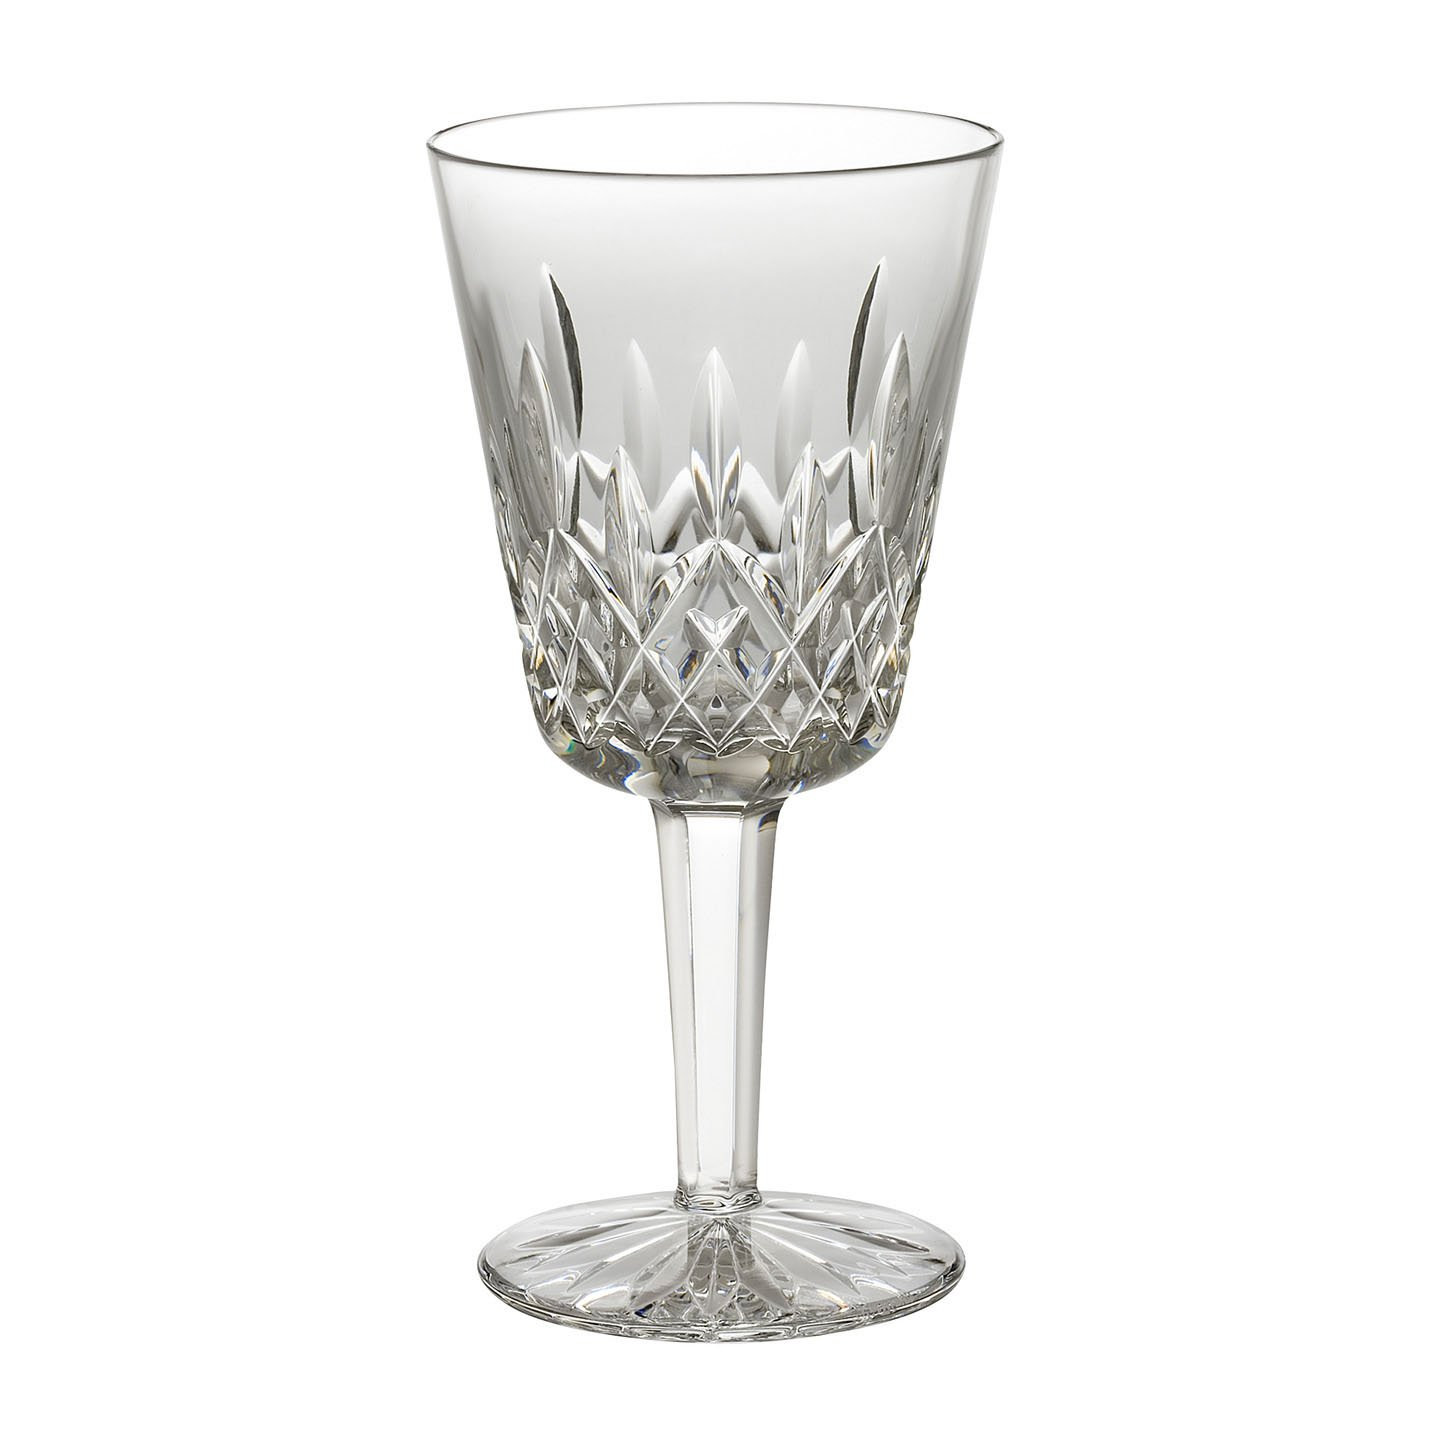 30 Spectacular Waterford Honey Bud Vase 2024 free download waterford honey bud vase of waterford crystal lismore collection waterforda crystal with regard to lismore goblet 17cm